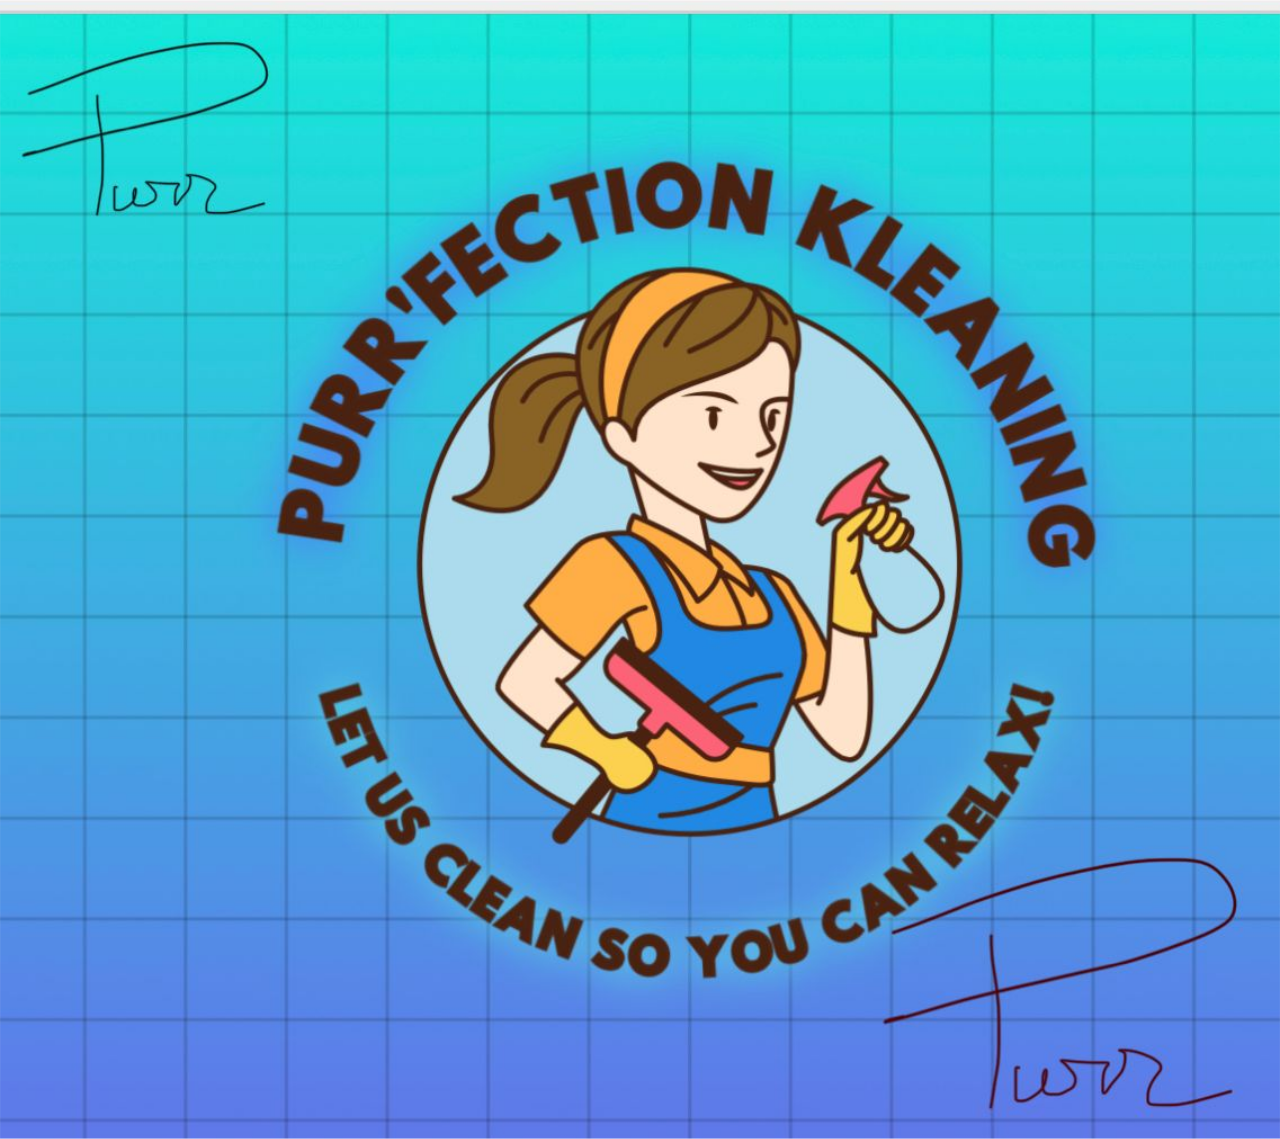  PURR'FECTION KLEANING's web page